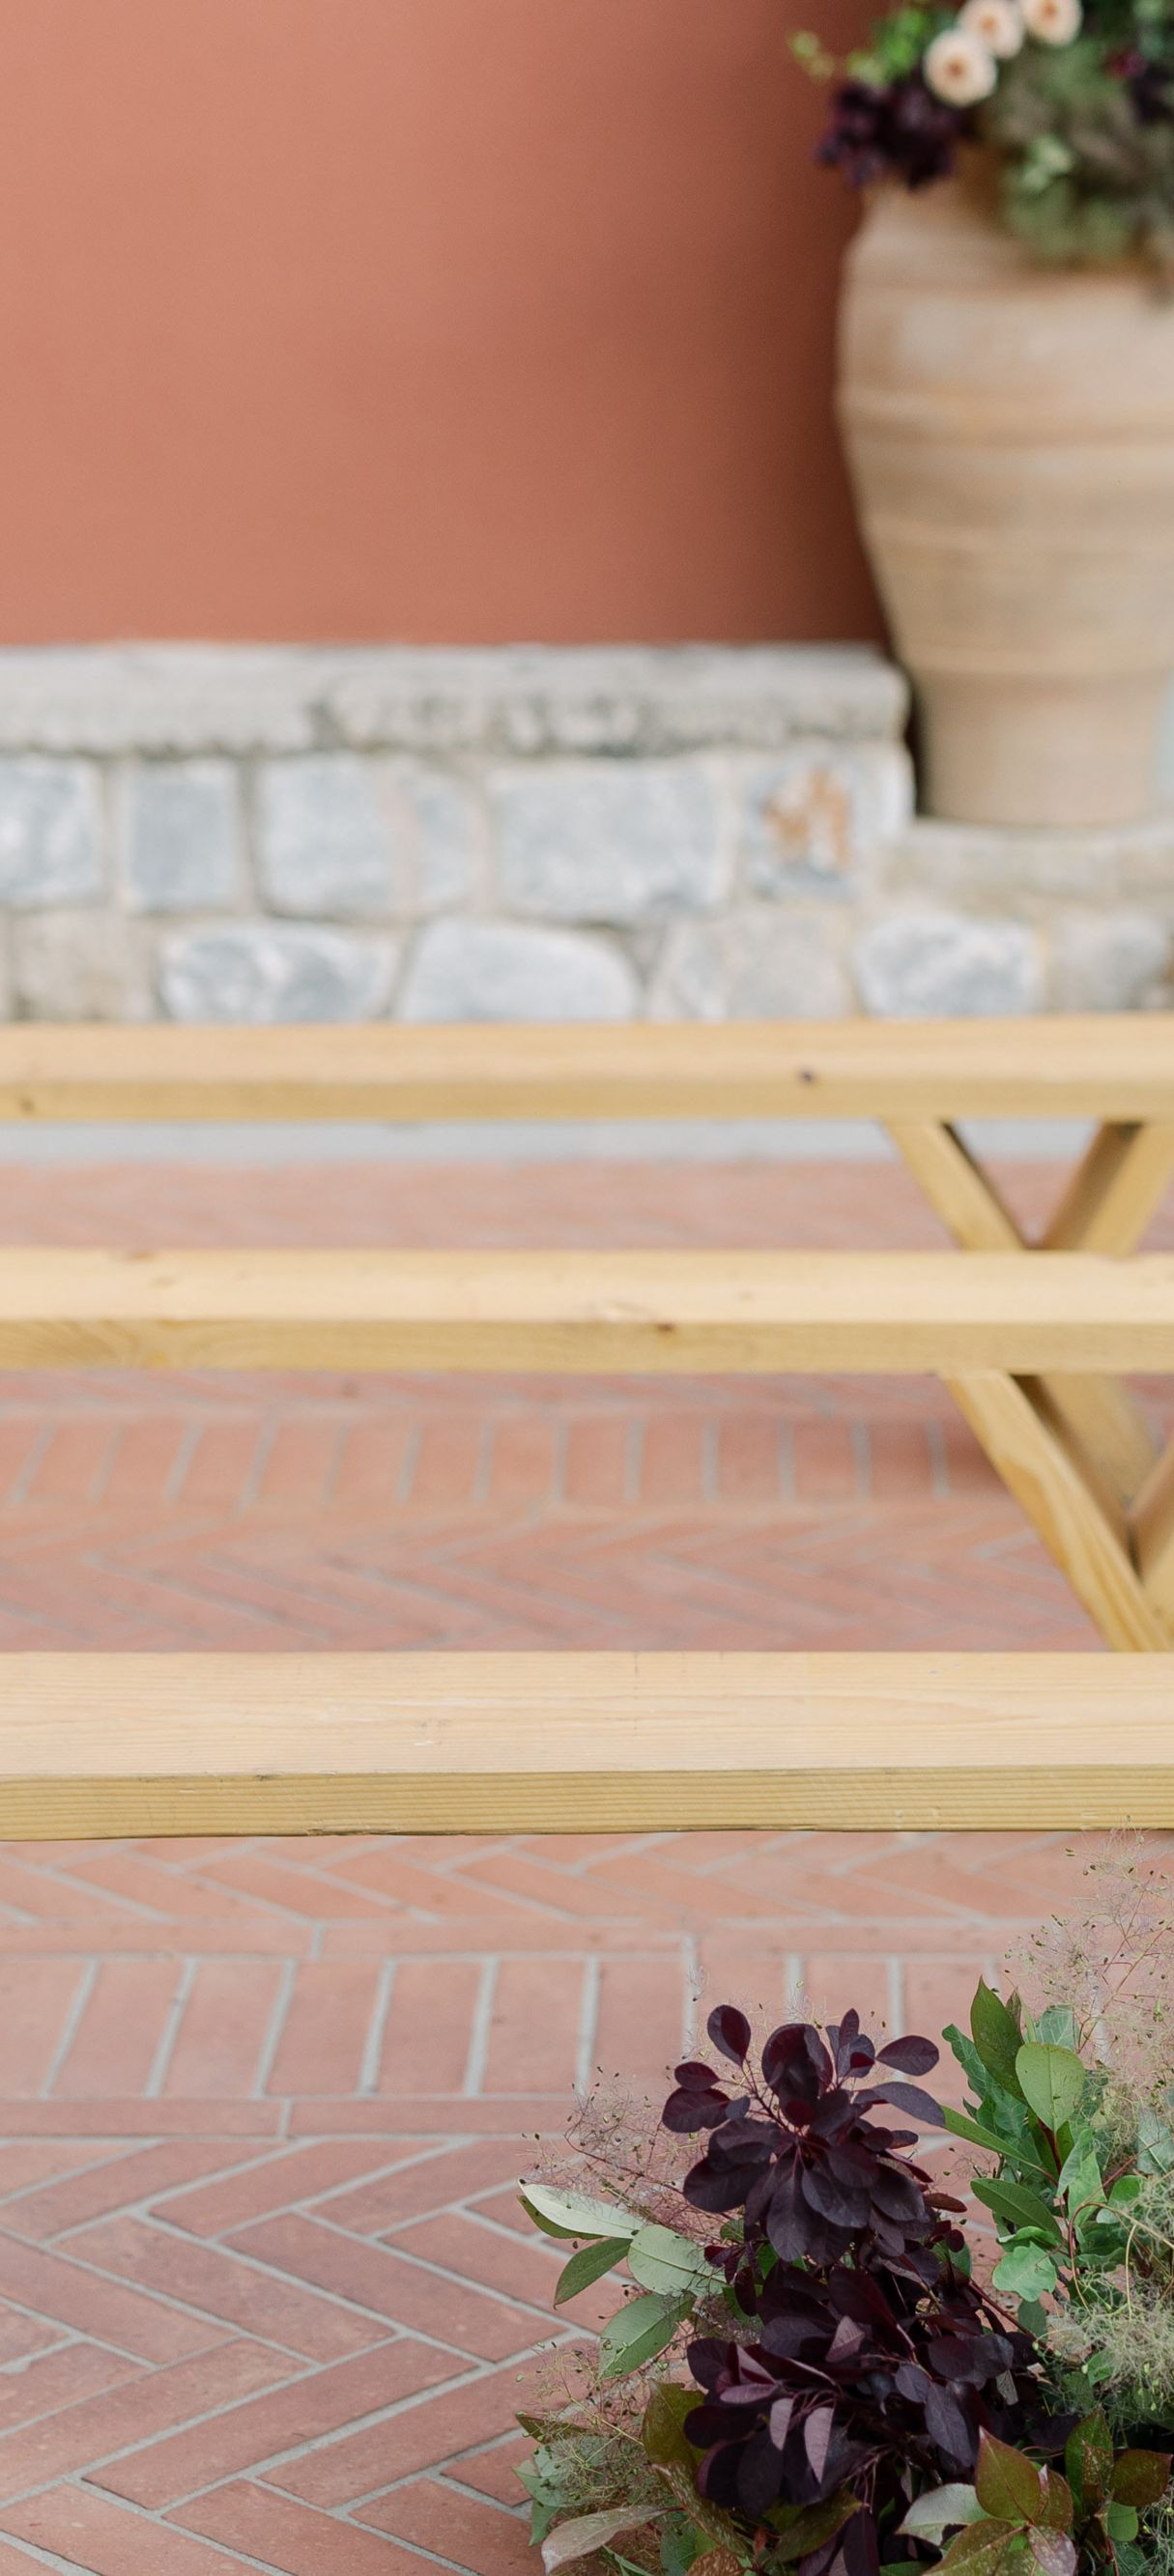 Benches for wedding attendees